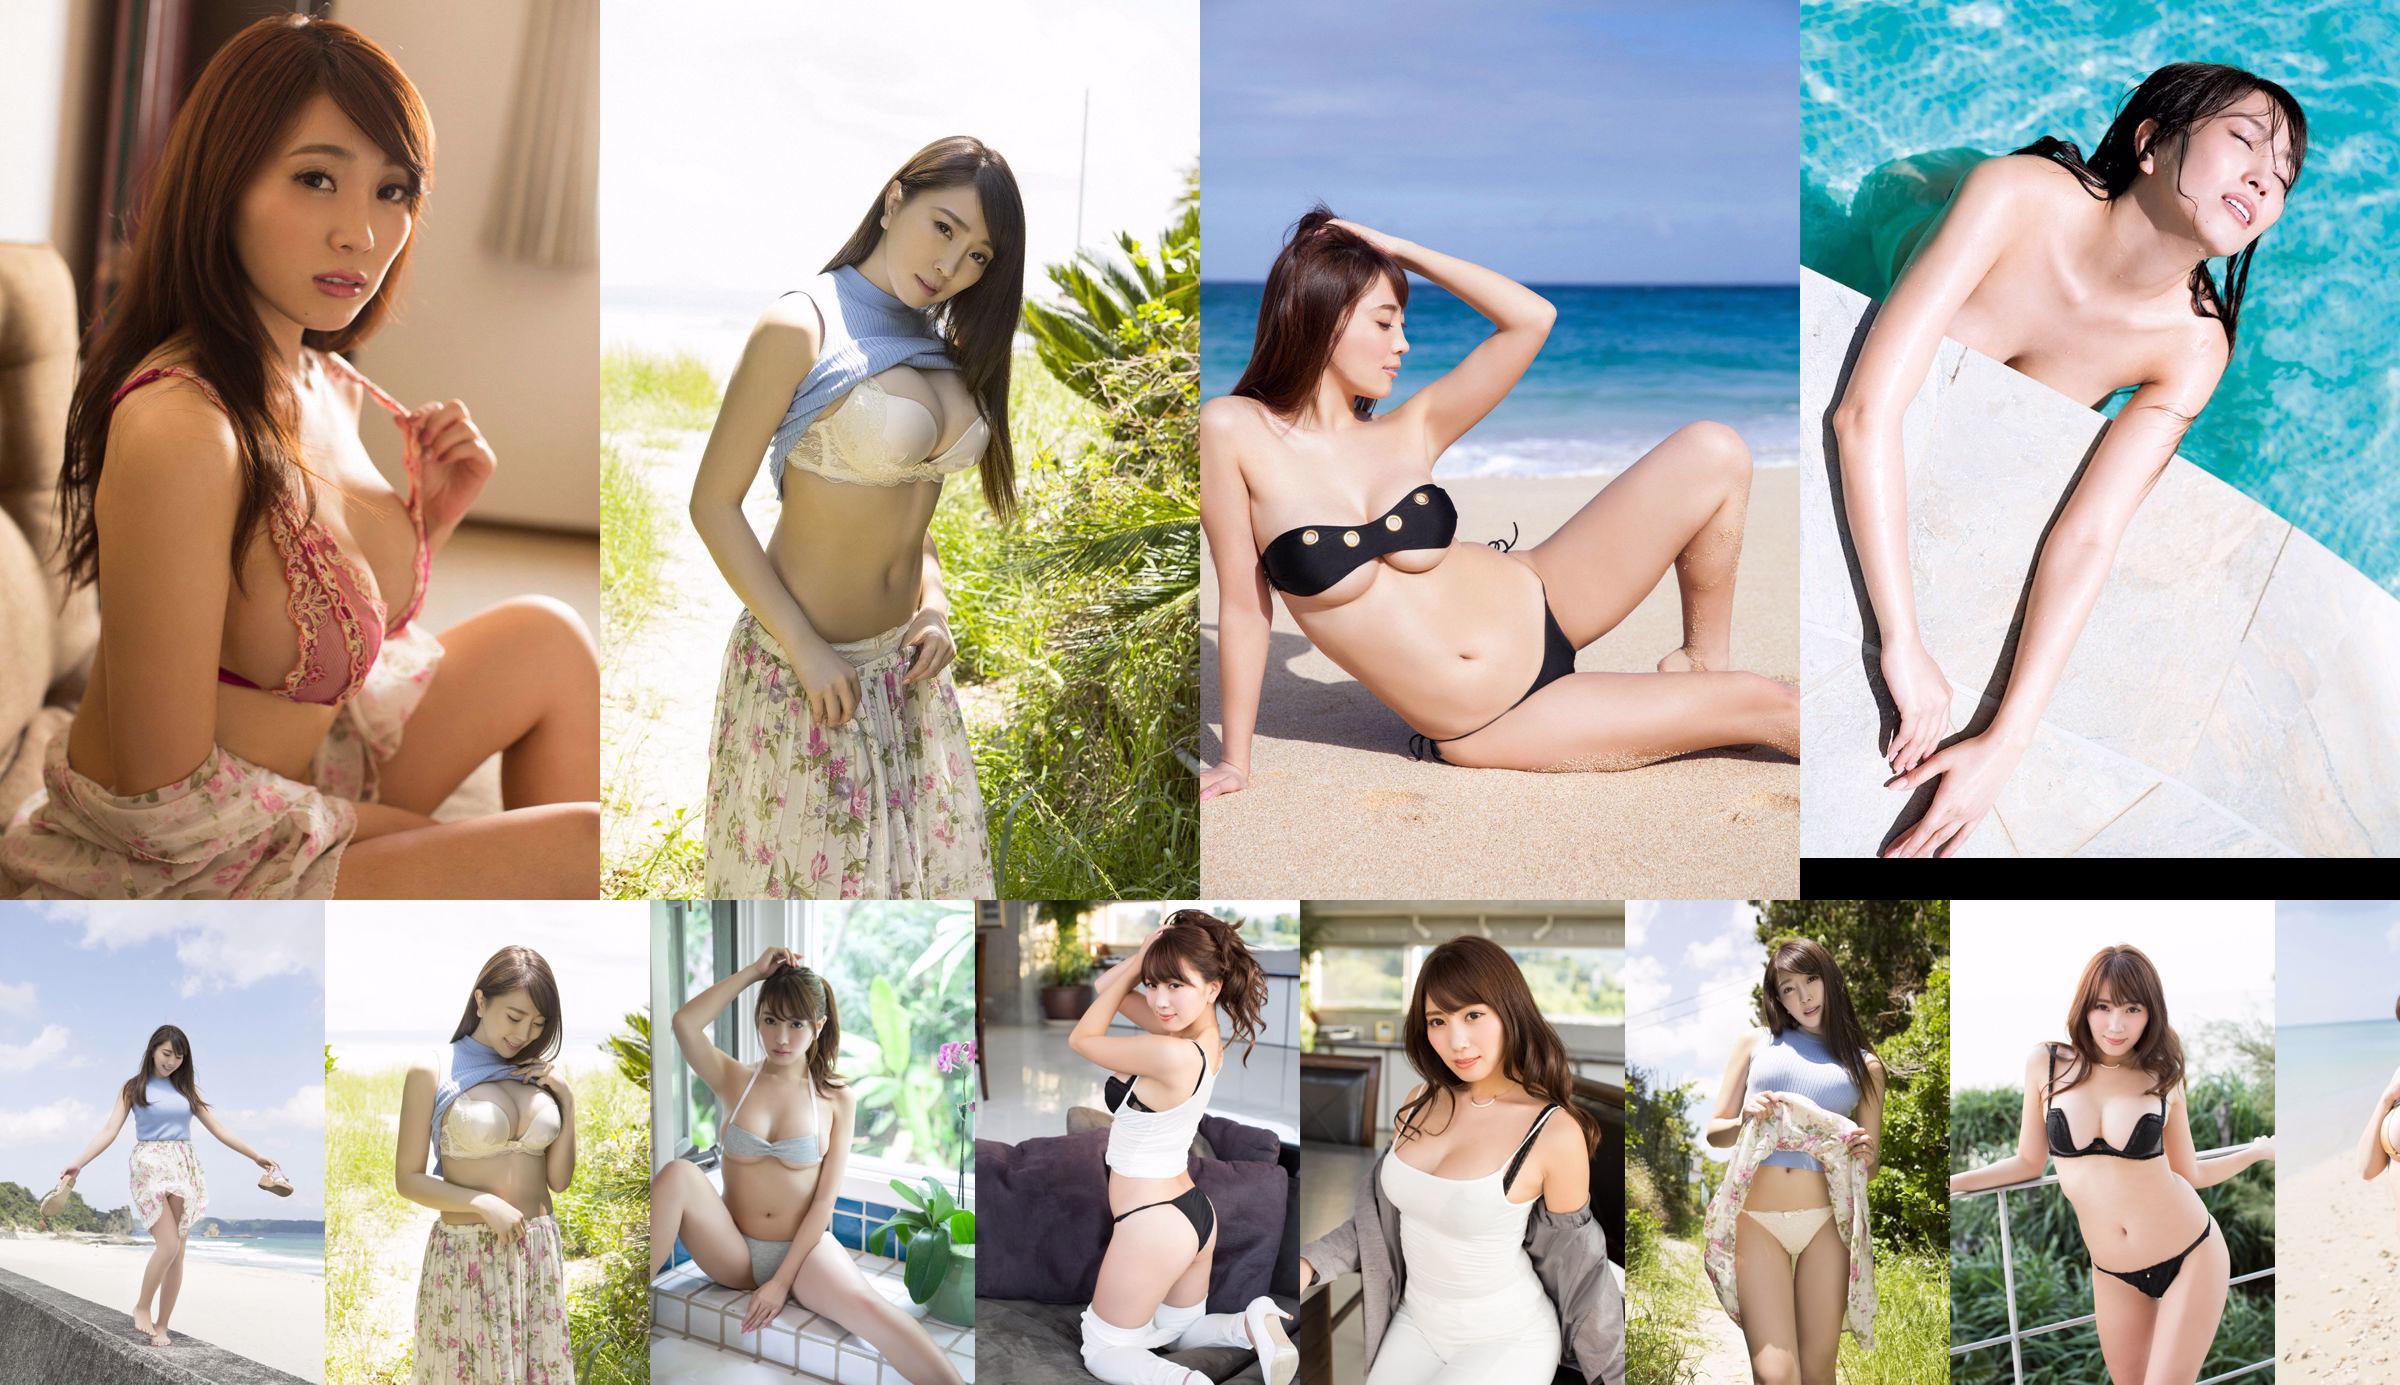 Yume Takeda Yume Takeda / Yume Takeda [Graphis] Gravure First off daughter No.5cc459 Page 1